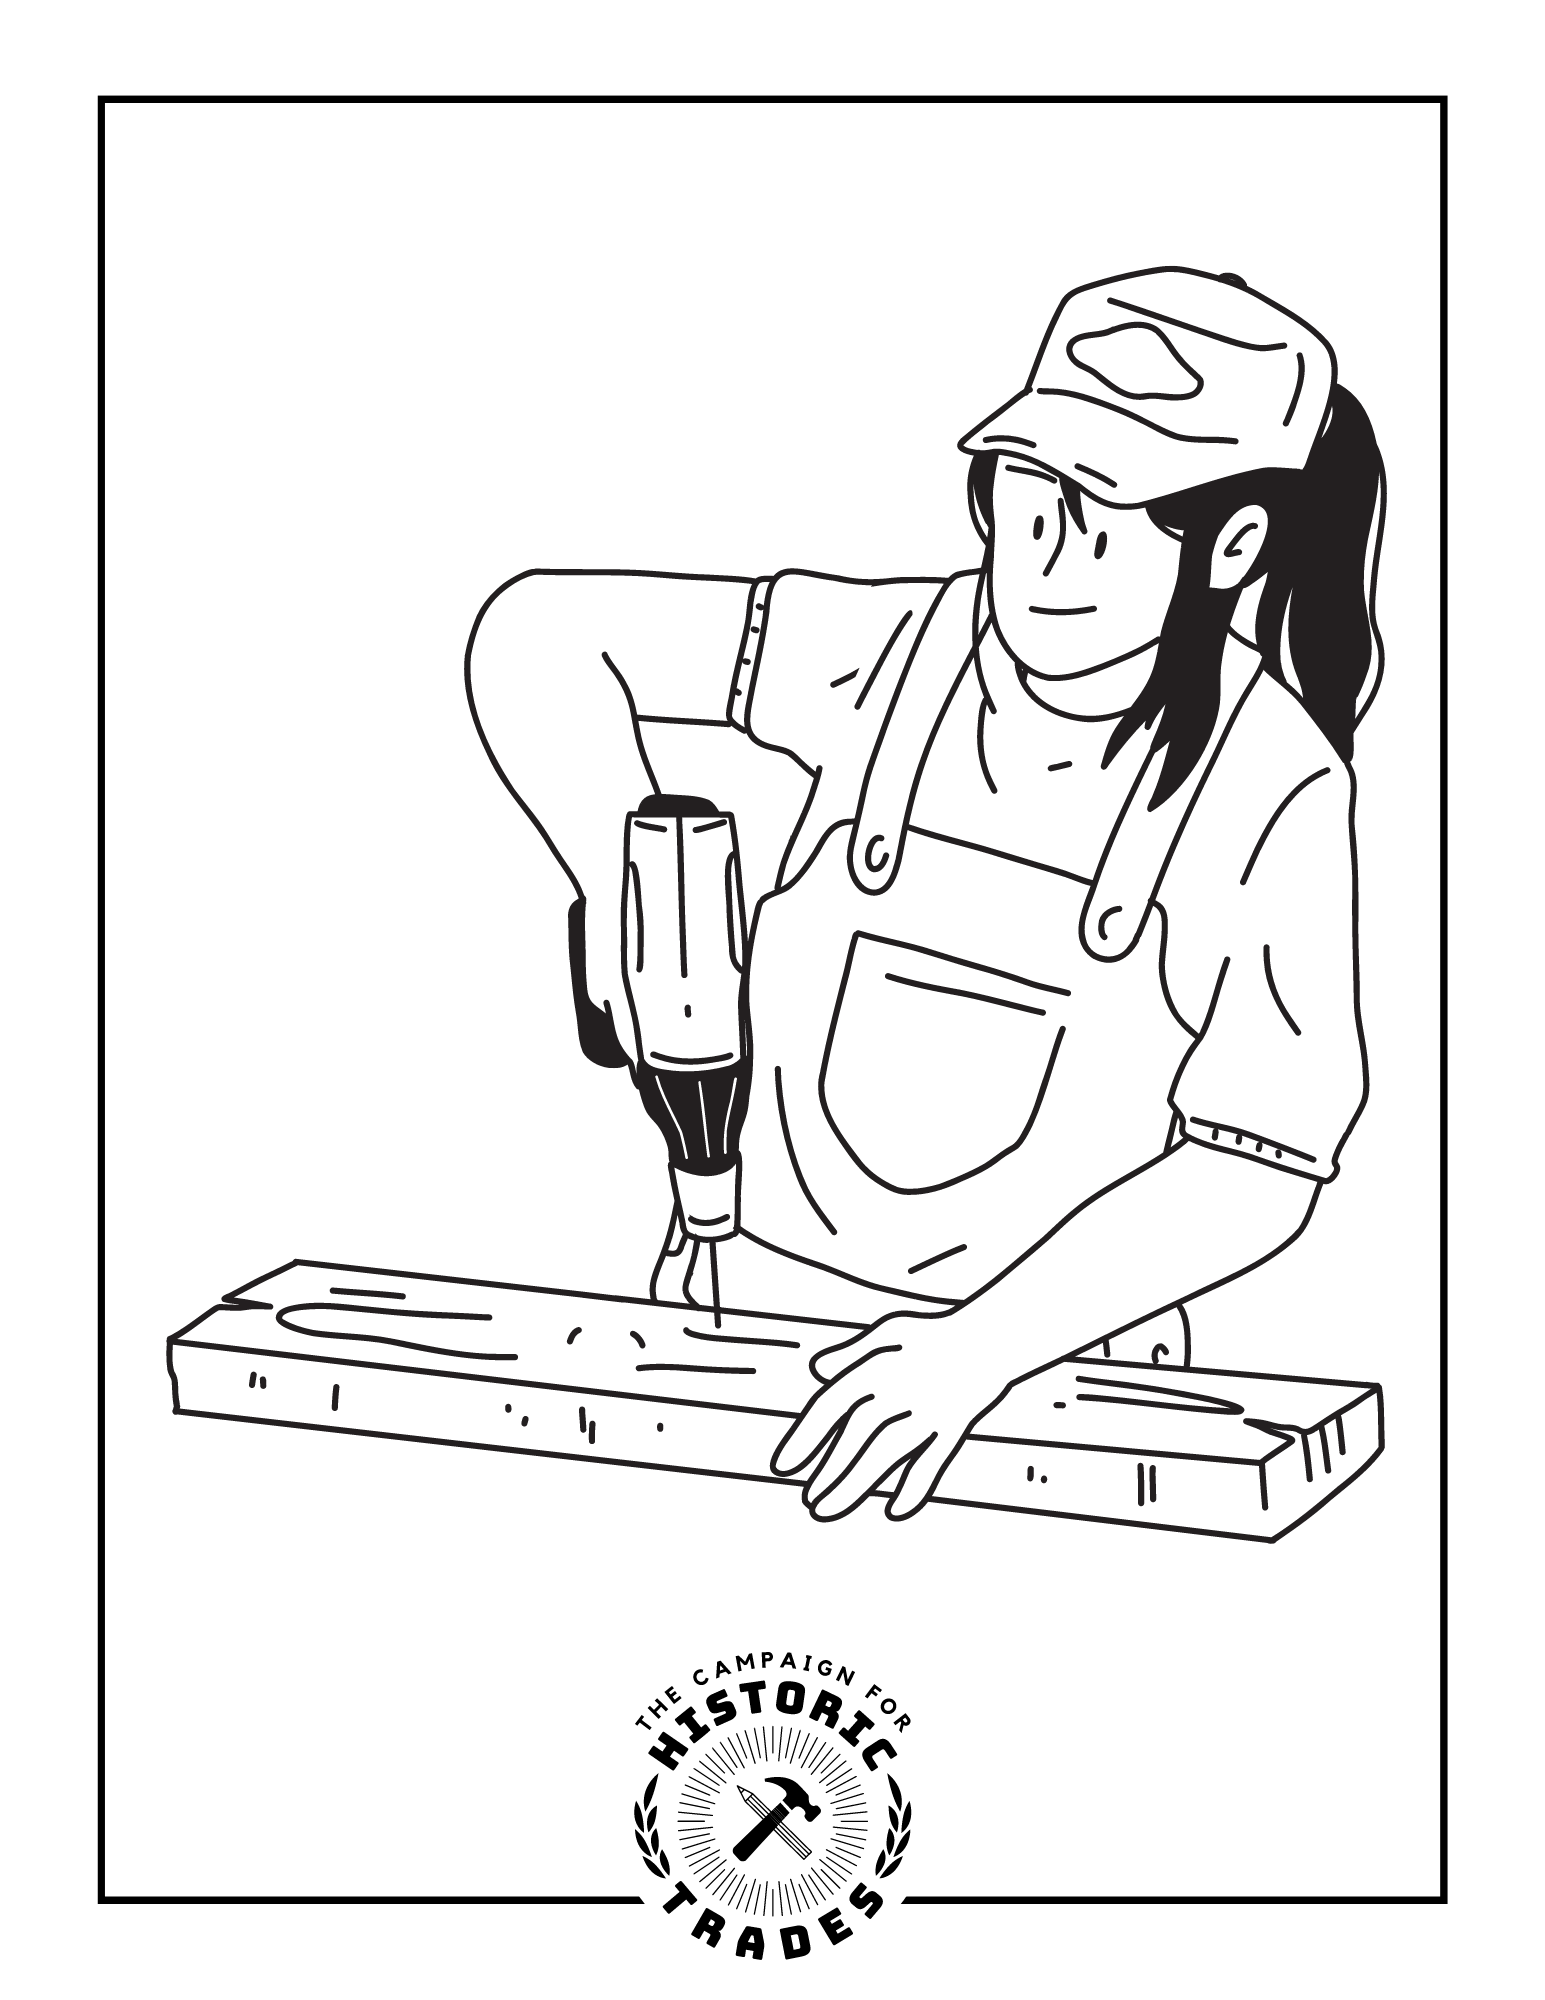 Black and white illustration of a person in overalls drilling into a plank of wood.